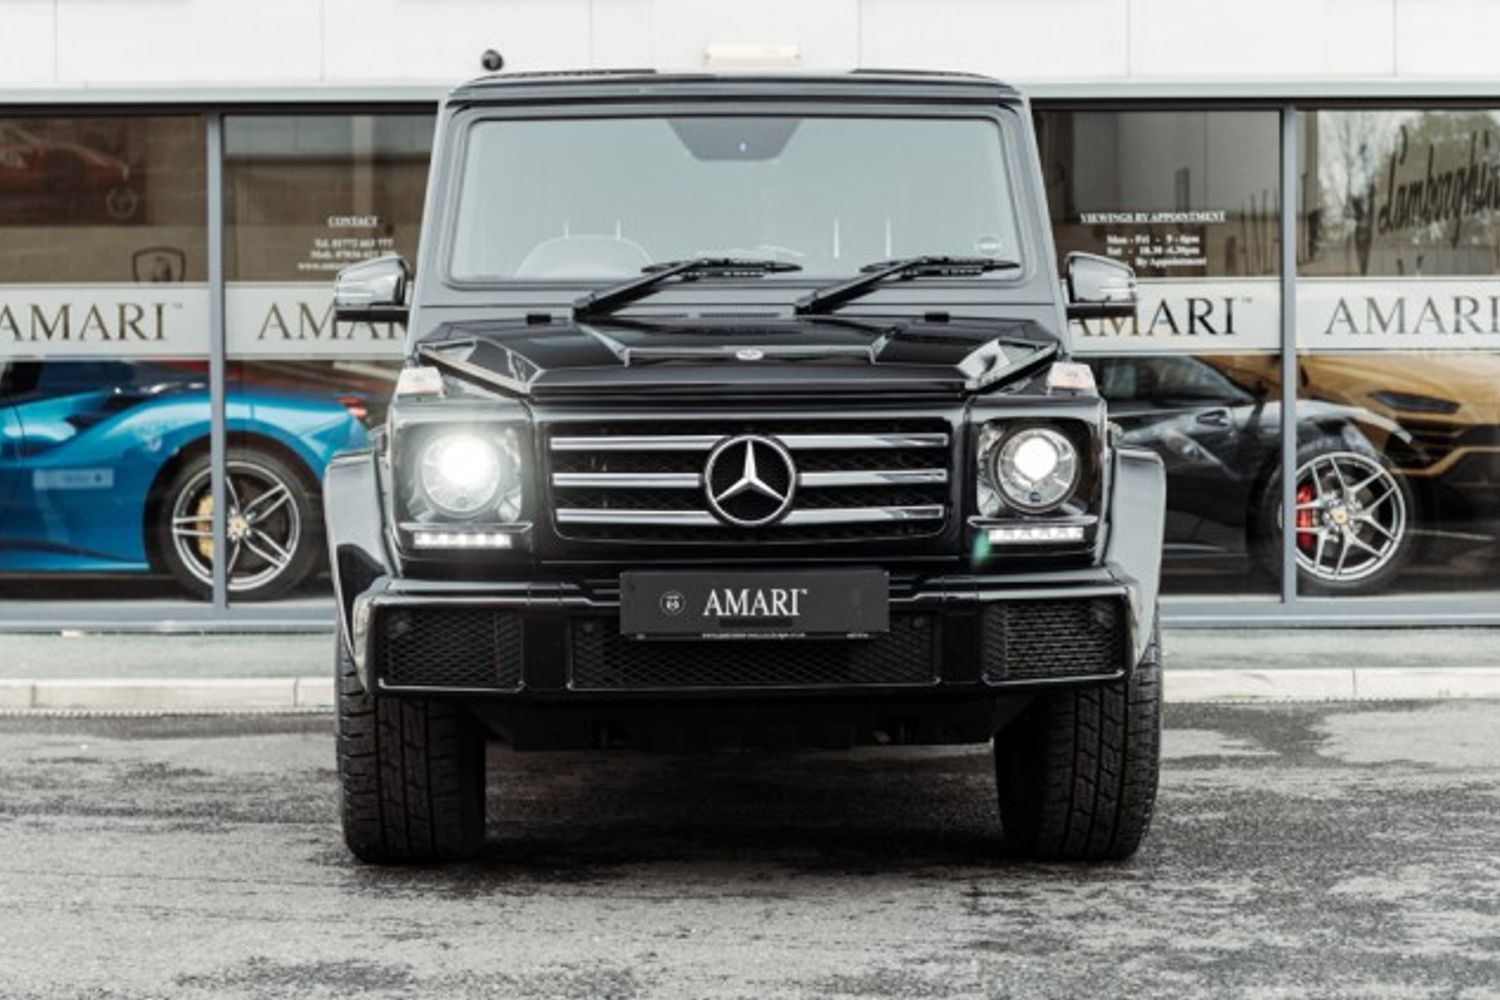 MERCEDES-BENZ G-CLASS DIESEL ESTATE 3.0 G 350 D 4MATIC NIGHT EDITION 5DR AUTOMATIC